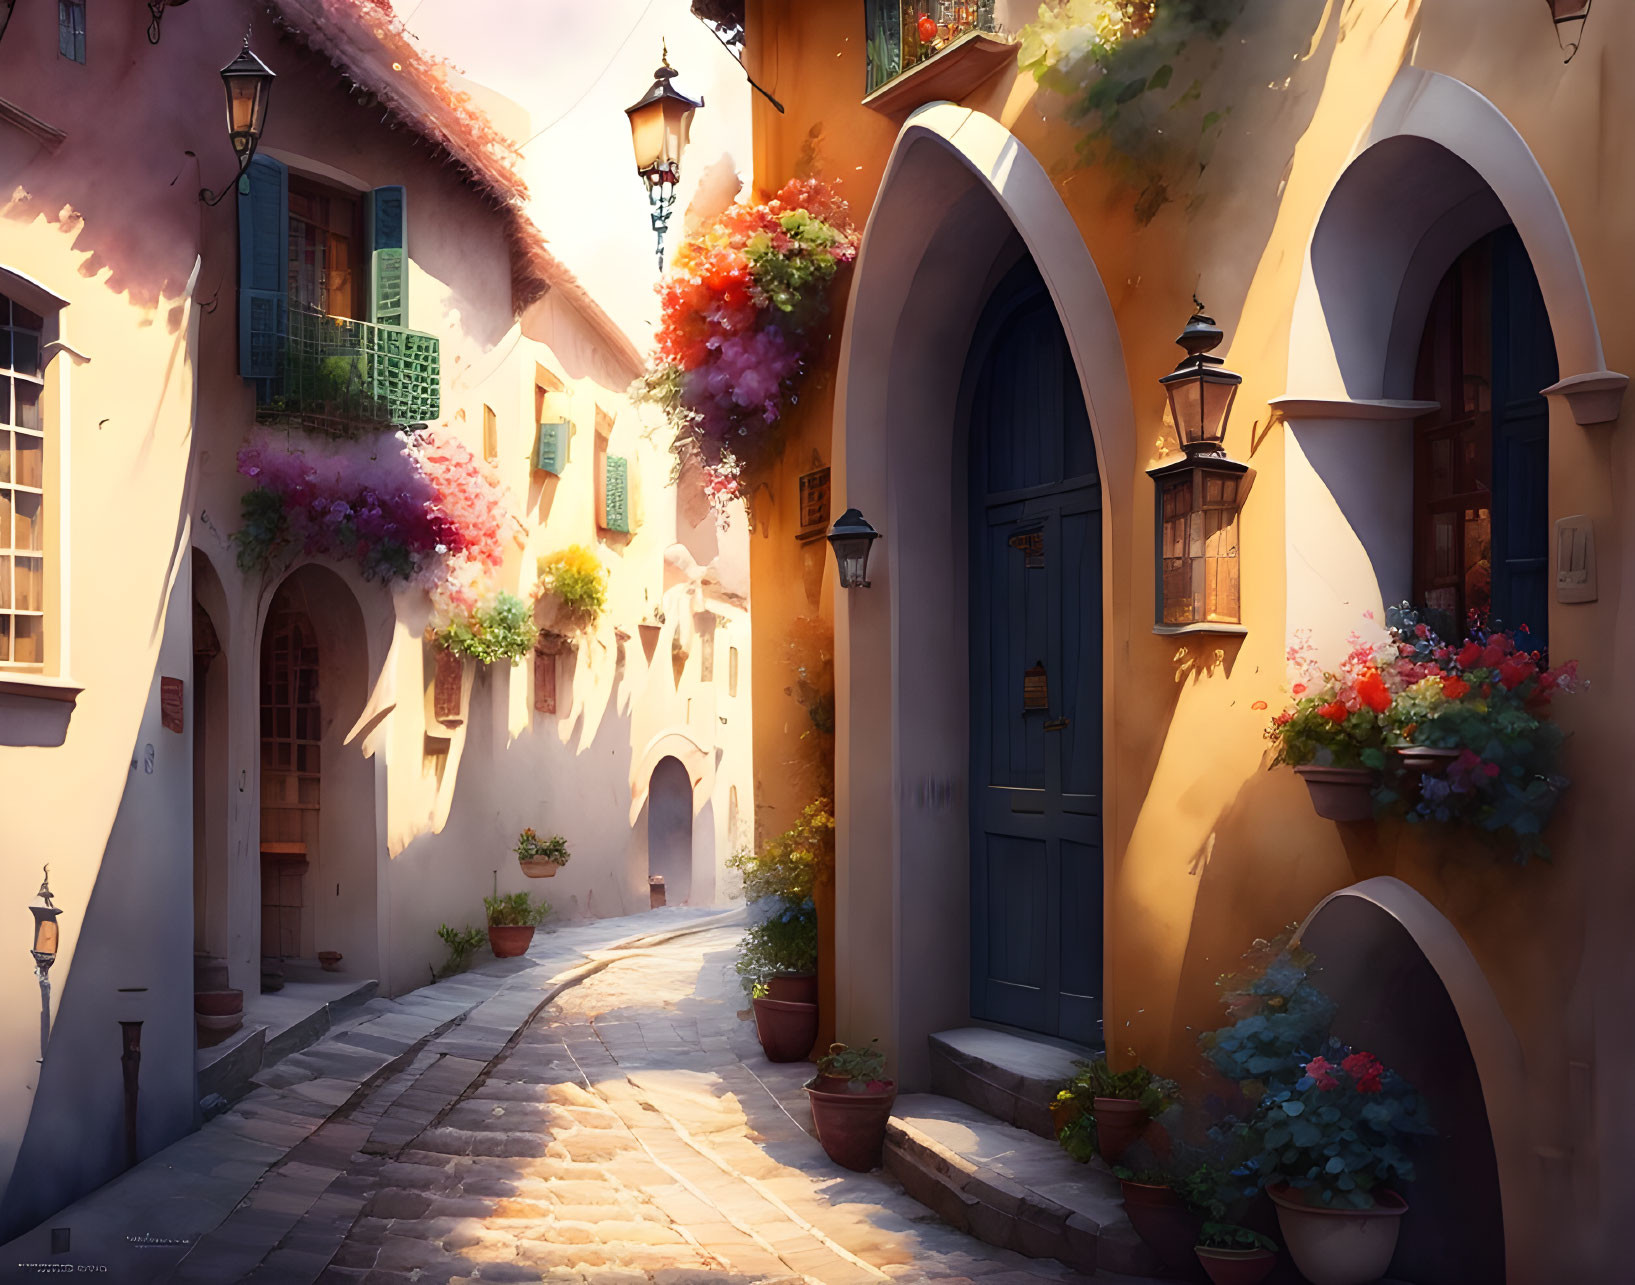 Traditional houses on cobblestone street with colorful flowers and lanterns